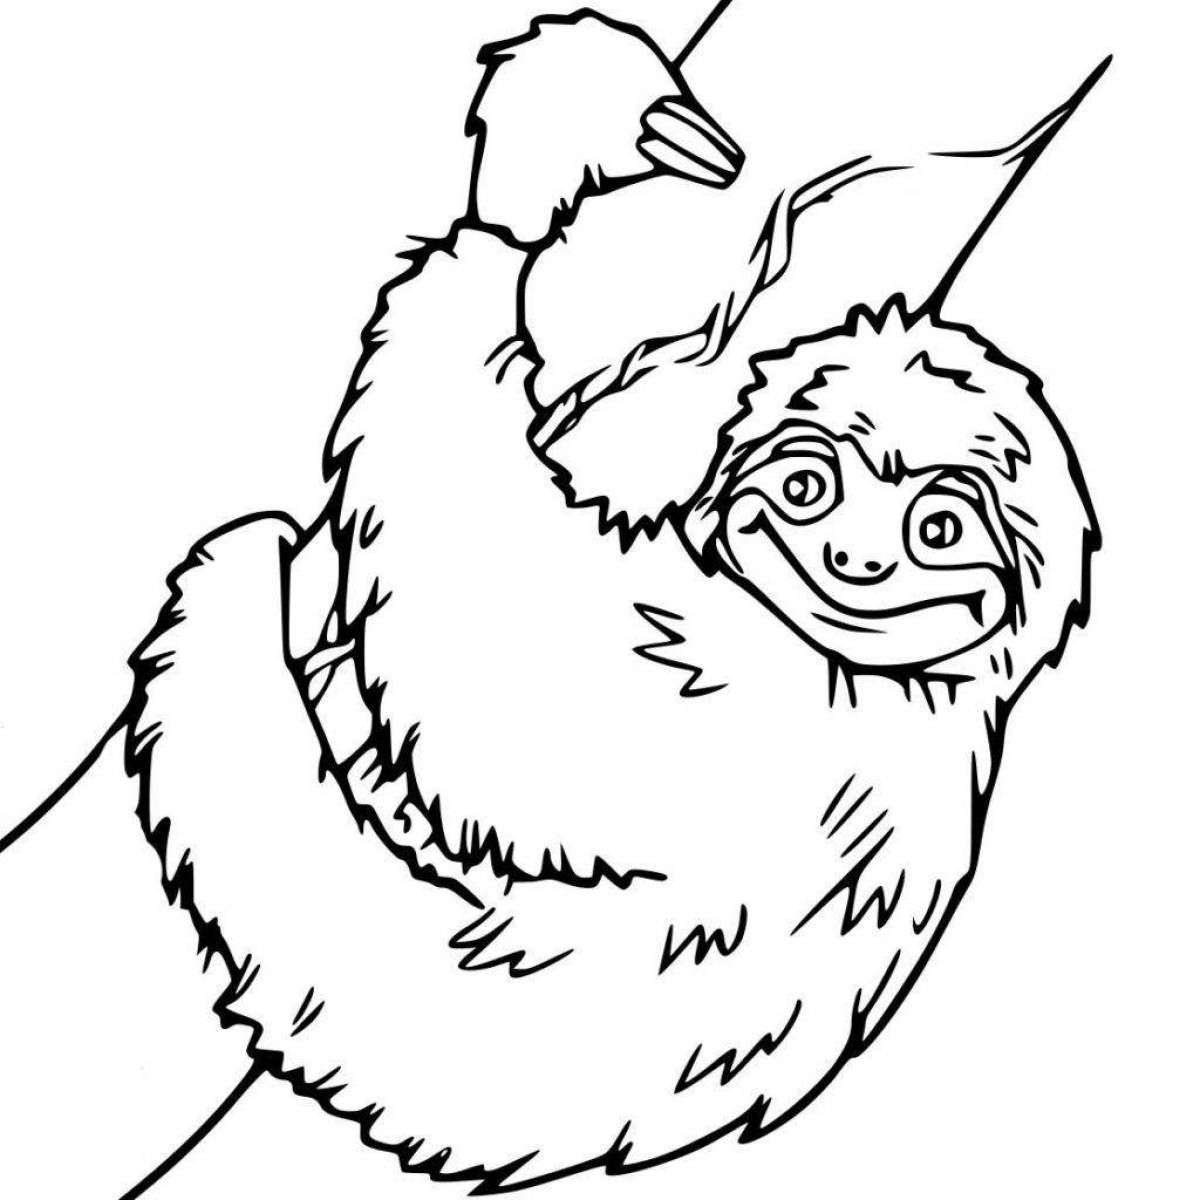 A fun sloth coloring book for kids